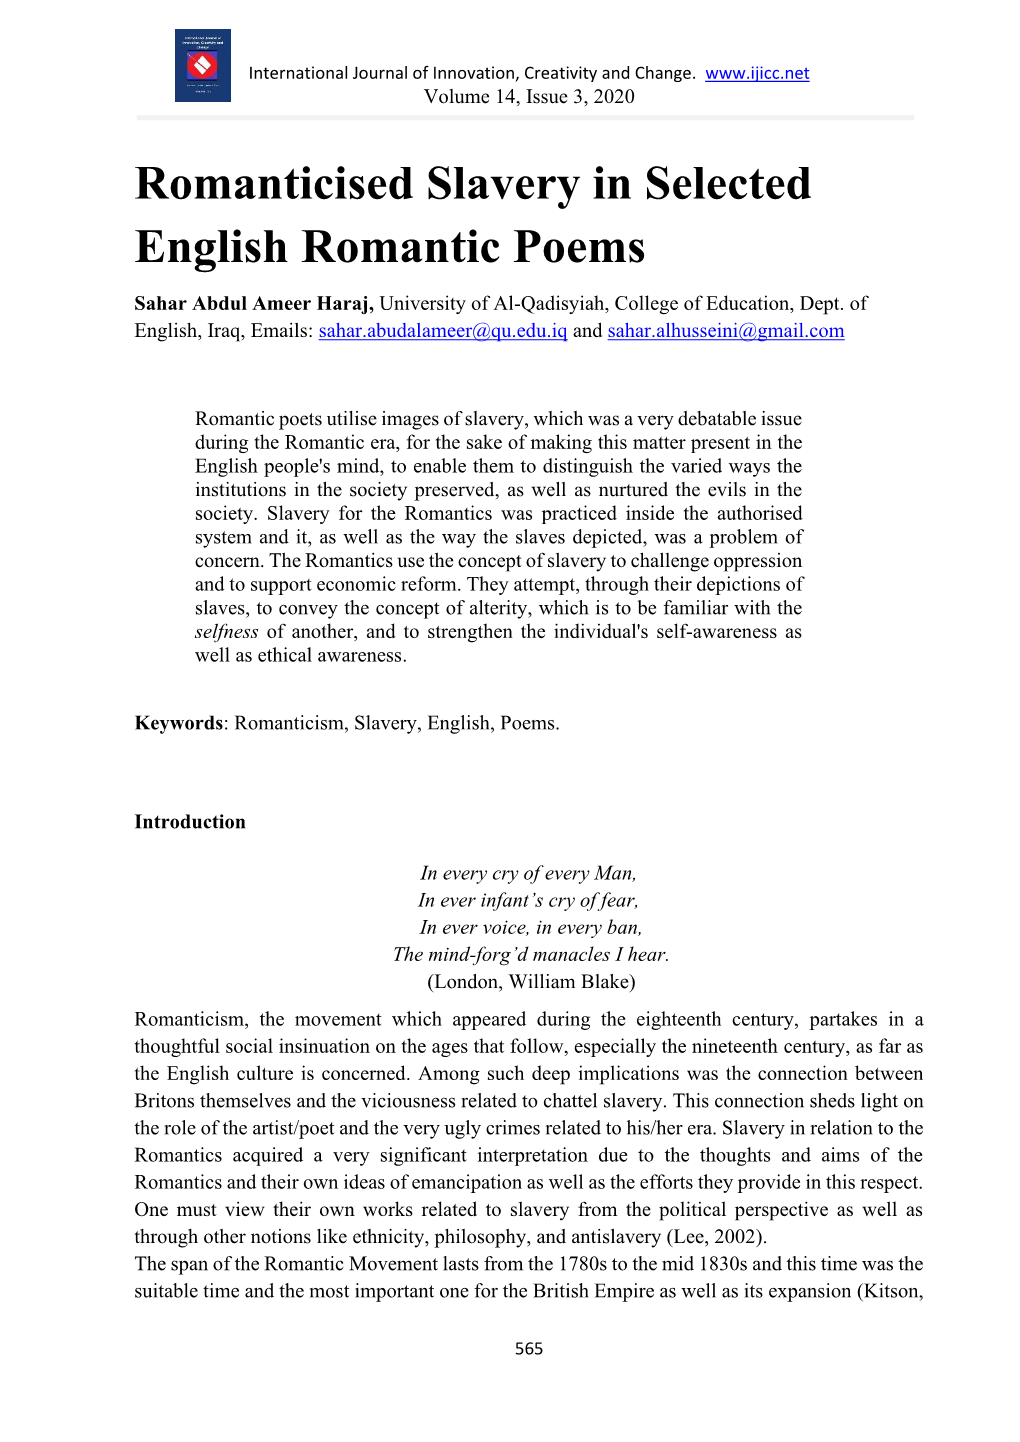 Romanticised Slavery in Selected English Romantic Poems